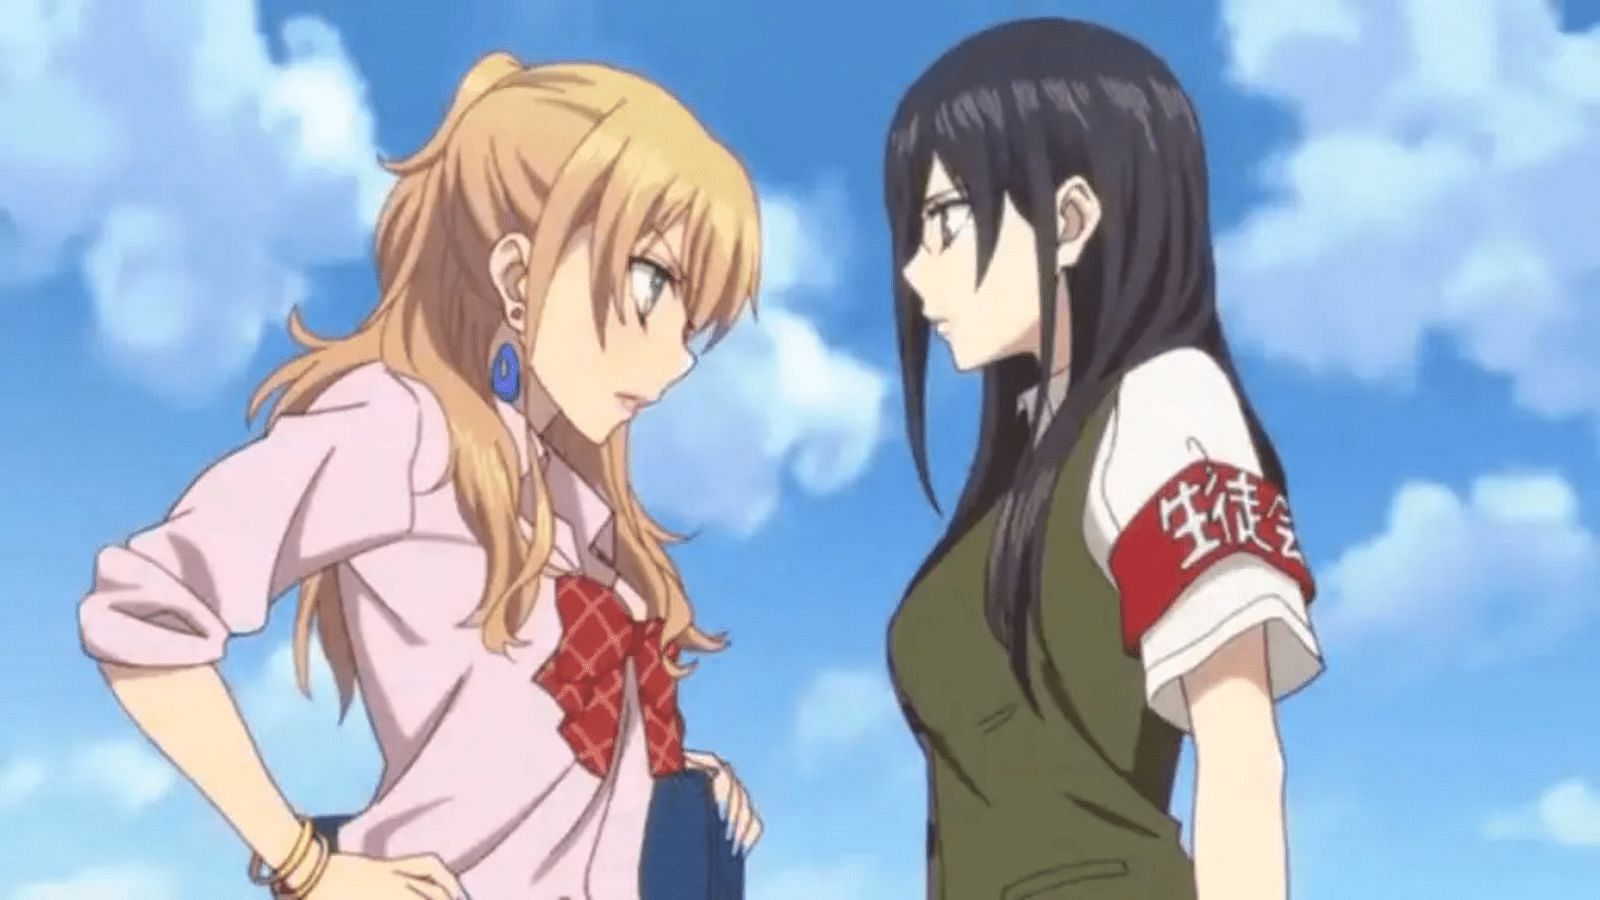 Thoughts on Citrus: Is It Worth Watching?